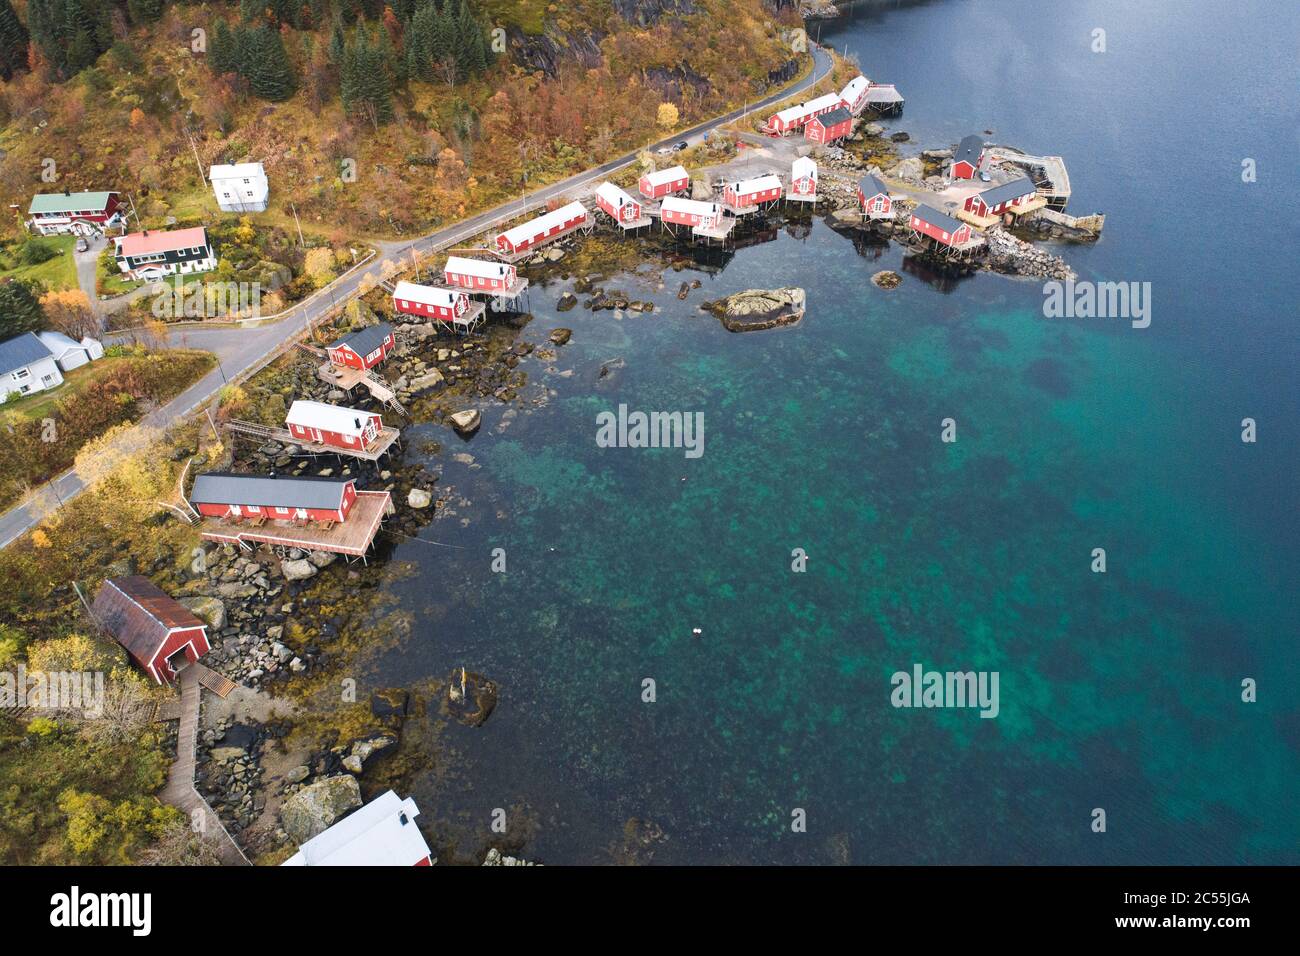 cabins and surroundings of Nusfjord, typical Norwegian village Stock Photo